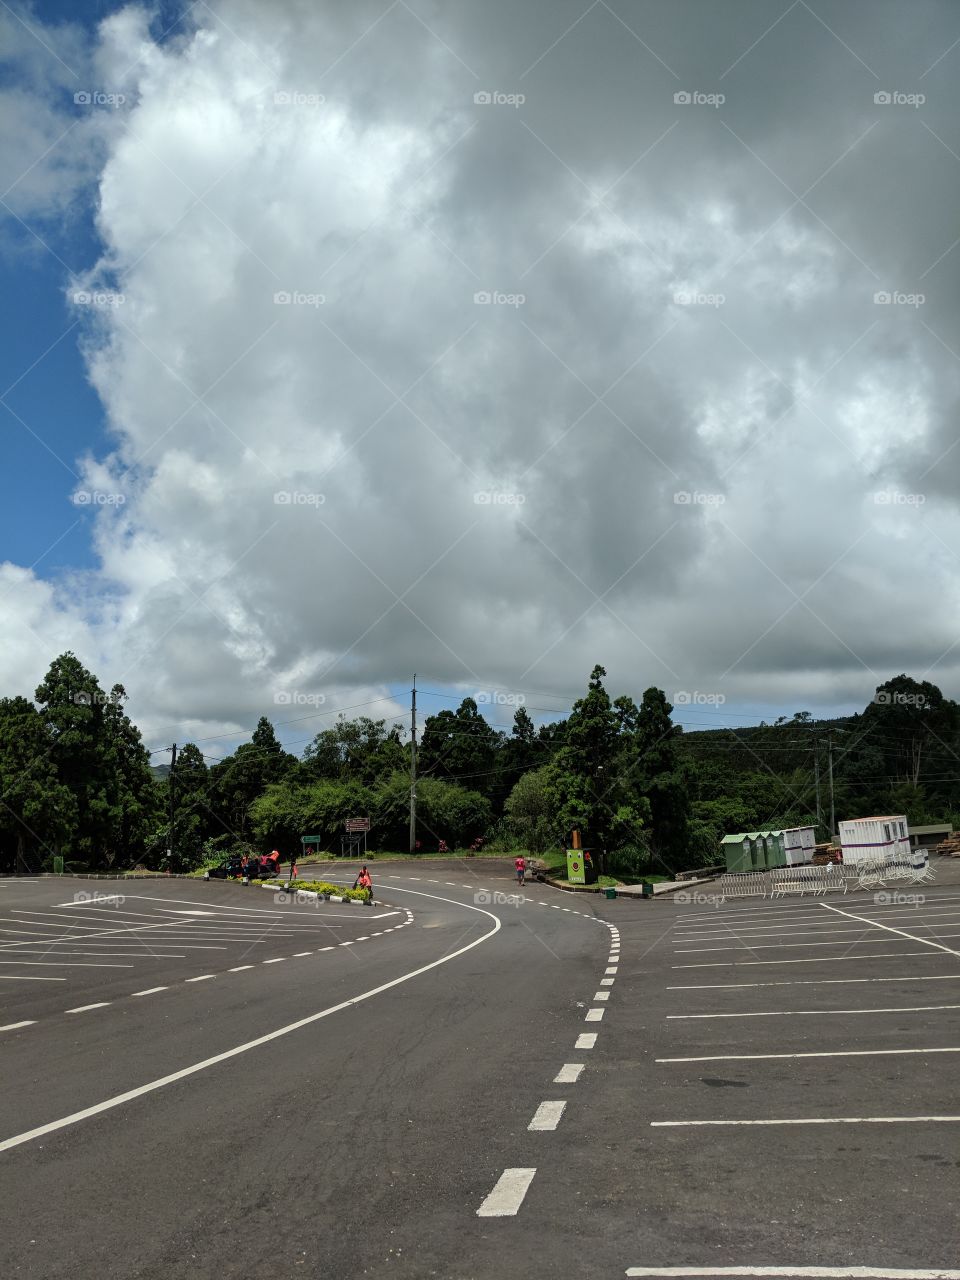 Road Leading From Ganga Talao. This image is taken at the premises of Ganga Talao lake in Mauritius, which is a crater lake.